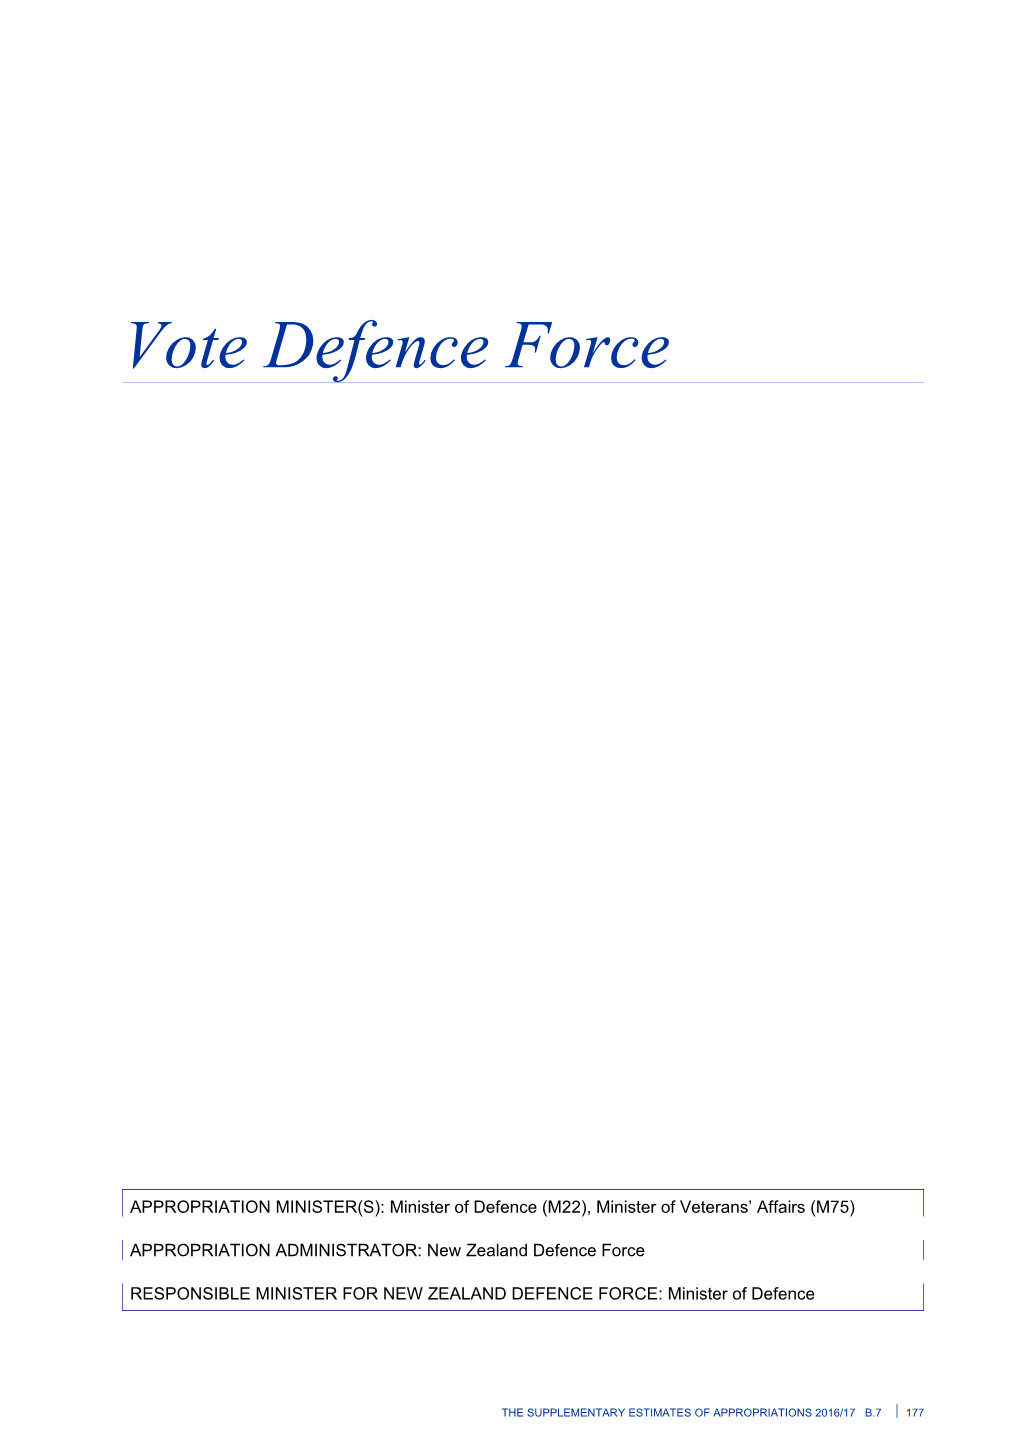 Vote Defence Force - Supplementary Estimates of Appropriations 2016/17 - Budget 2017